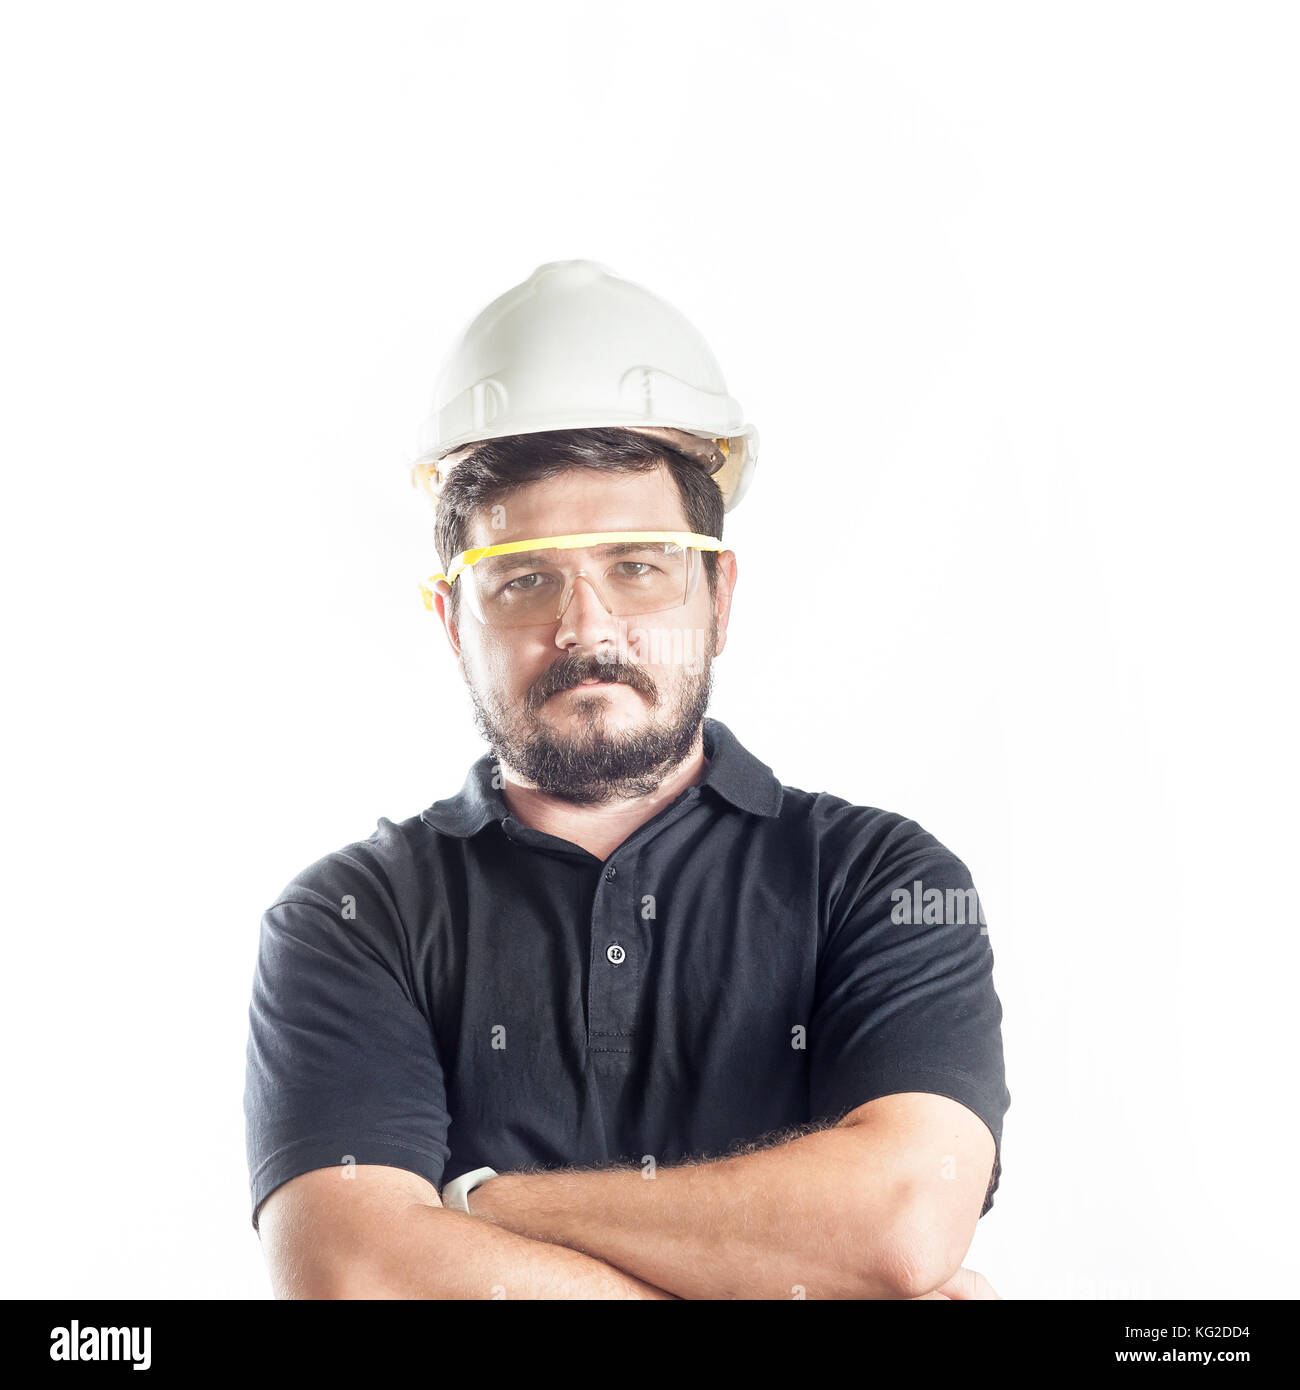 Caucasian engineer man with safety helmet on white background Stock Photo